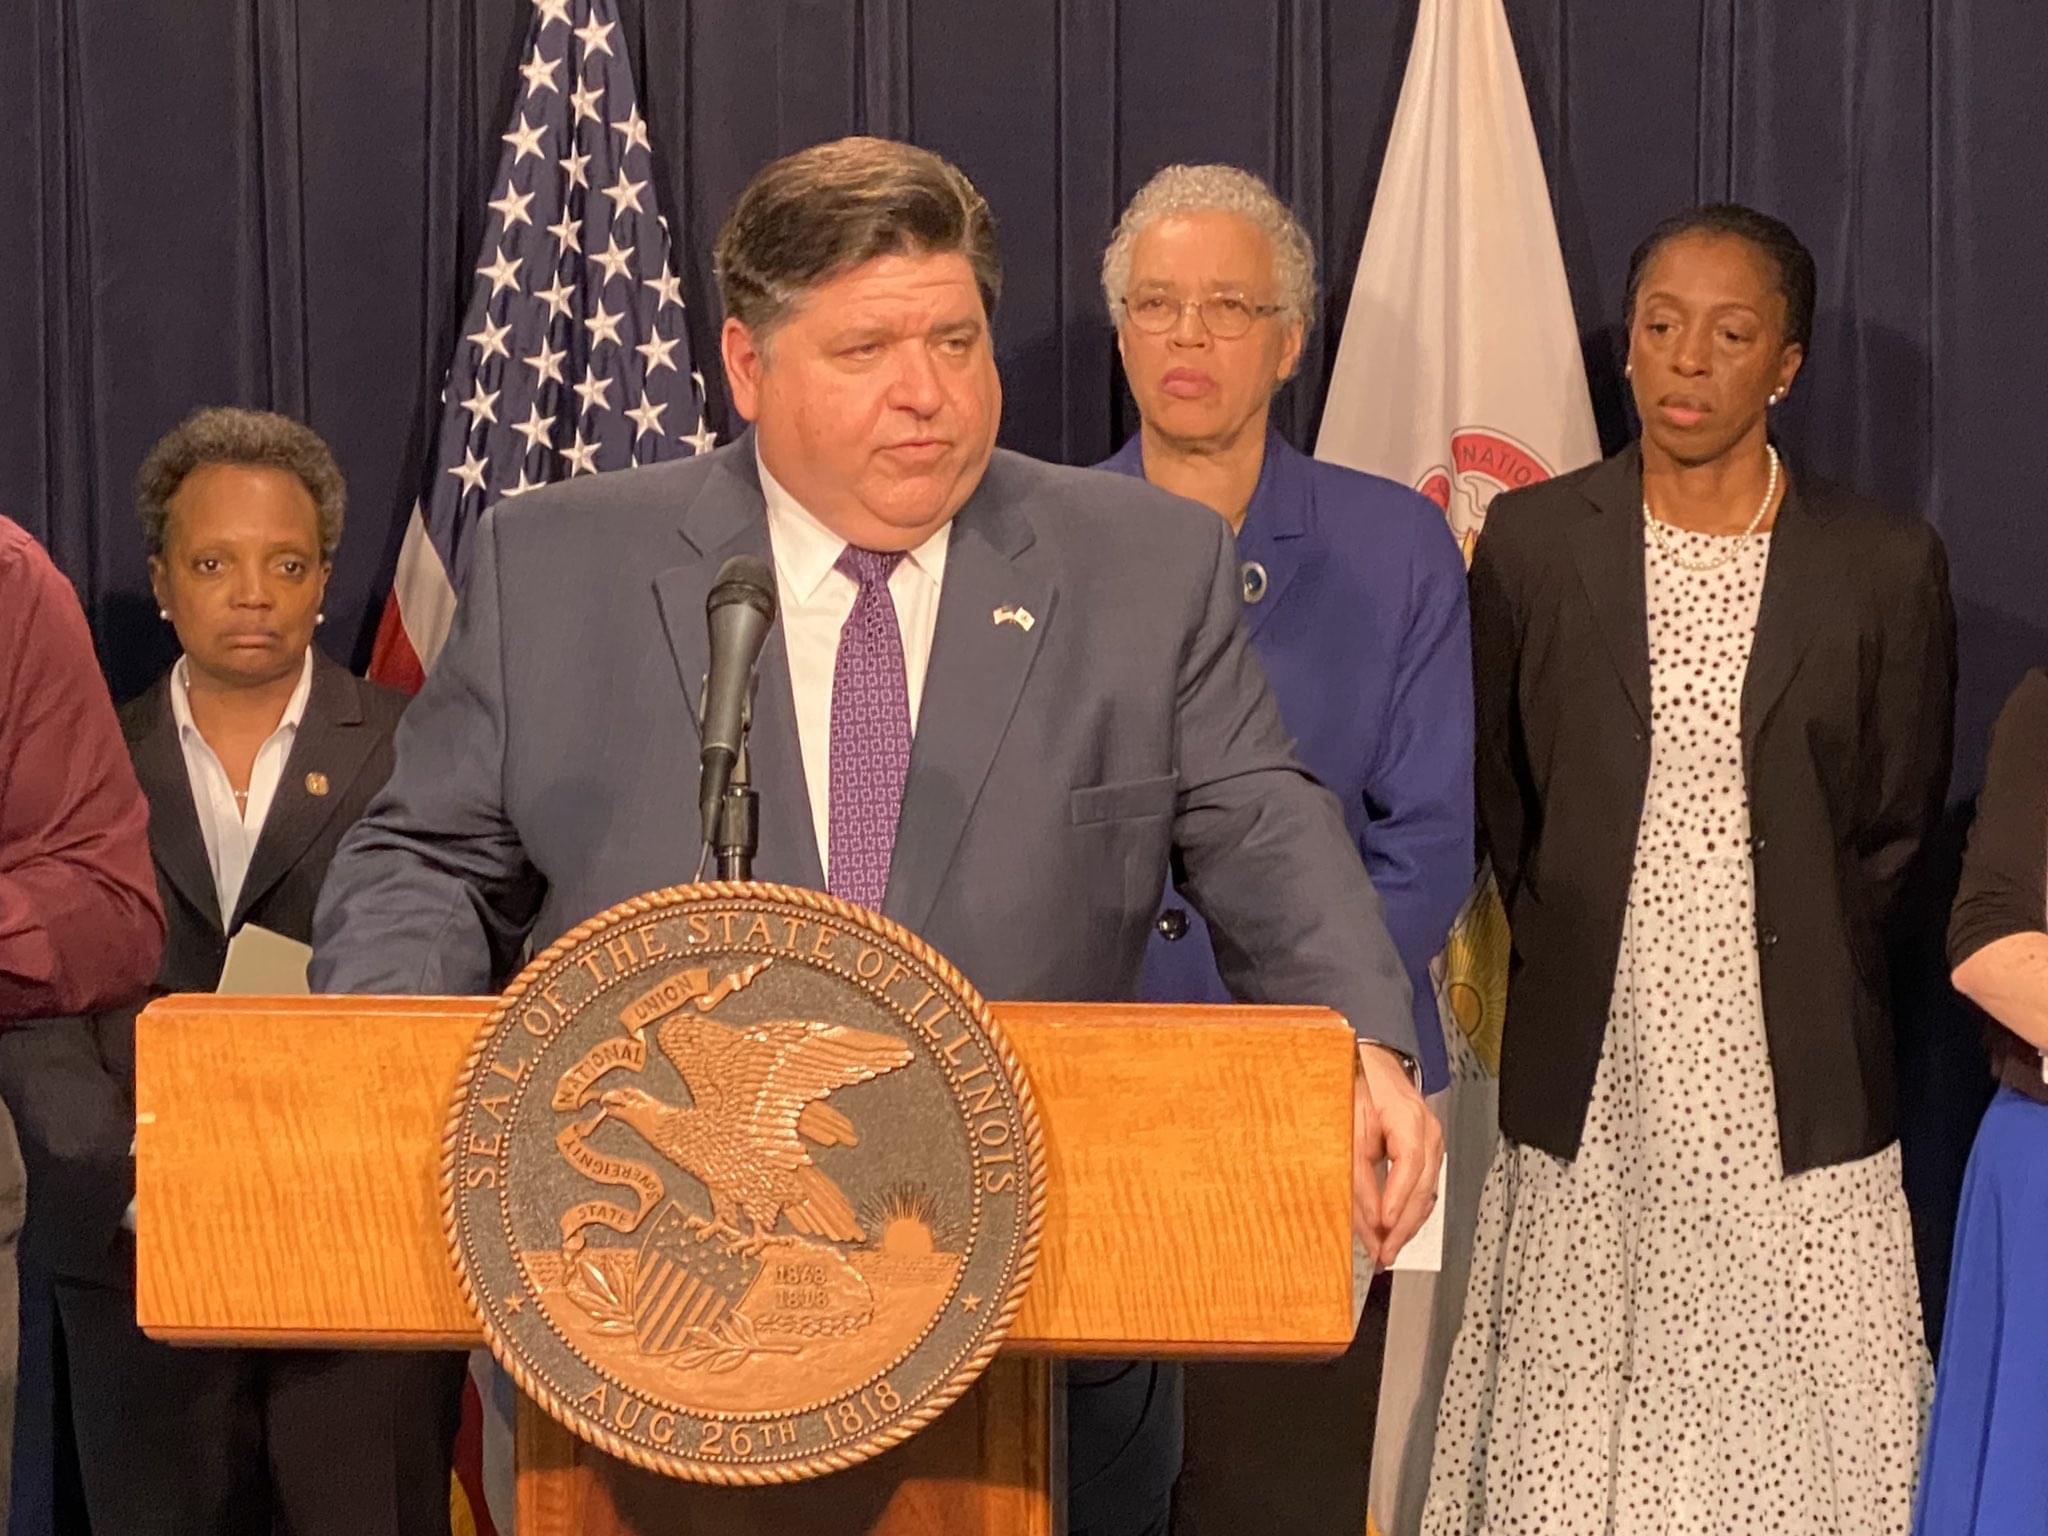 Gov. Pritzker continues fight for abortion rights at Planned Parenthood Illinois